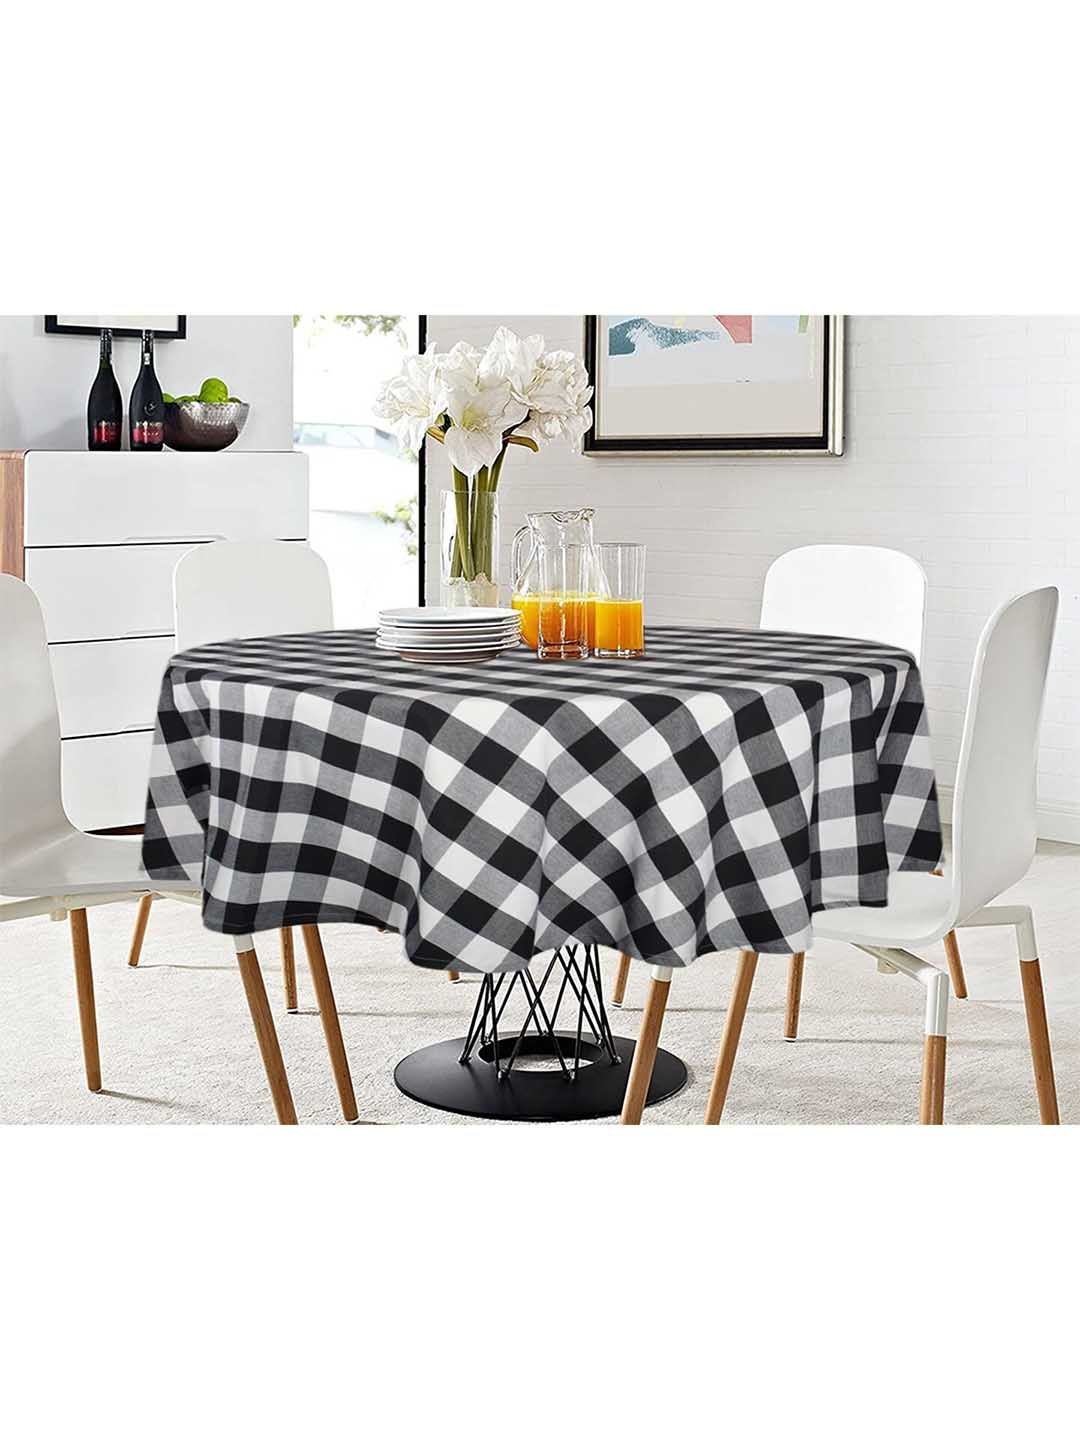 Lushomes Buffalo Checks Black Plaid Dining Table Cover Price in India